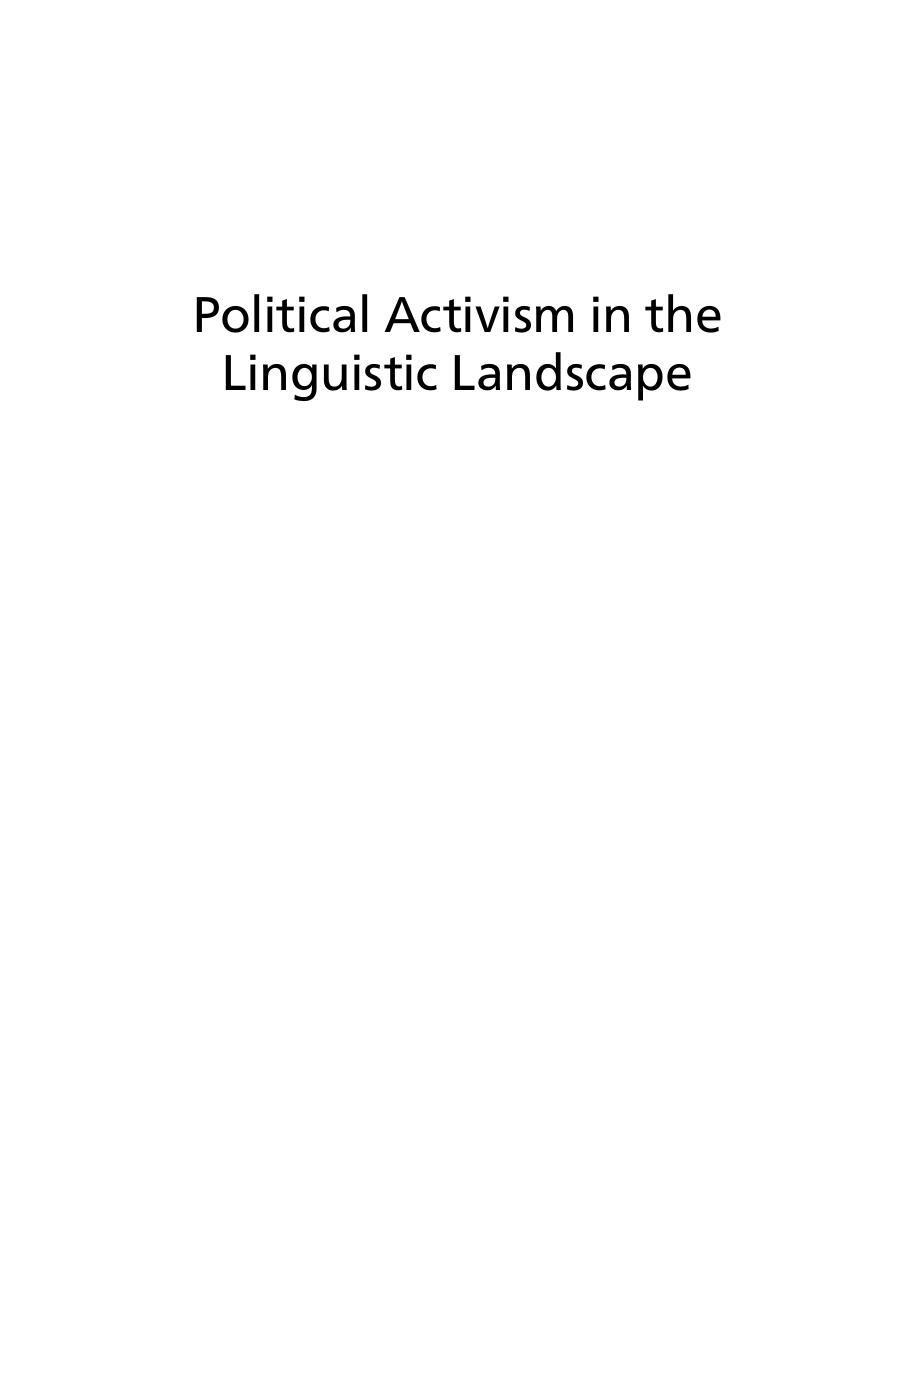 Political Activism in the Linguistic Landscape: Or, how to use Public Space as a Medium for Protest by Philip Seargeant; Korina Giaxoglou; Frank Monaghan